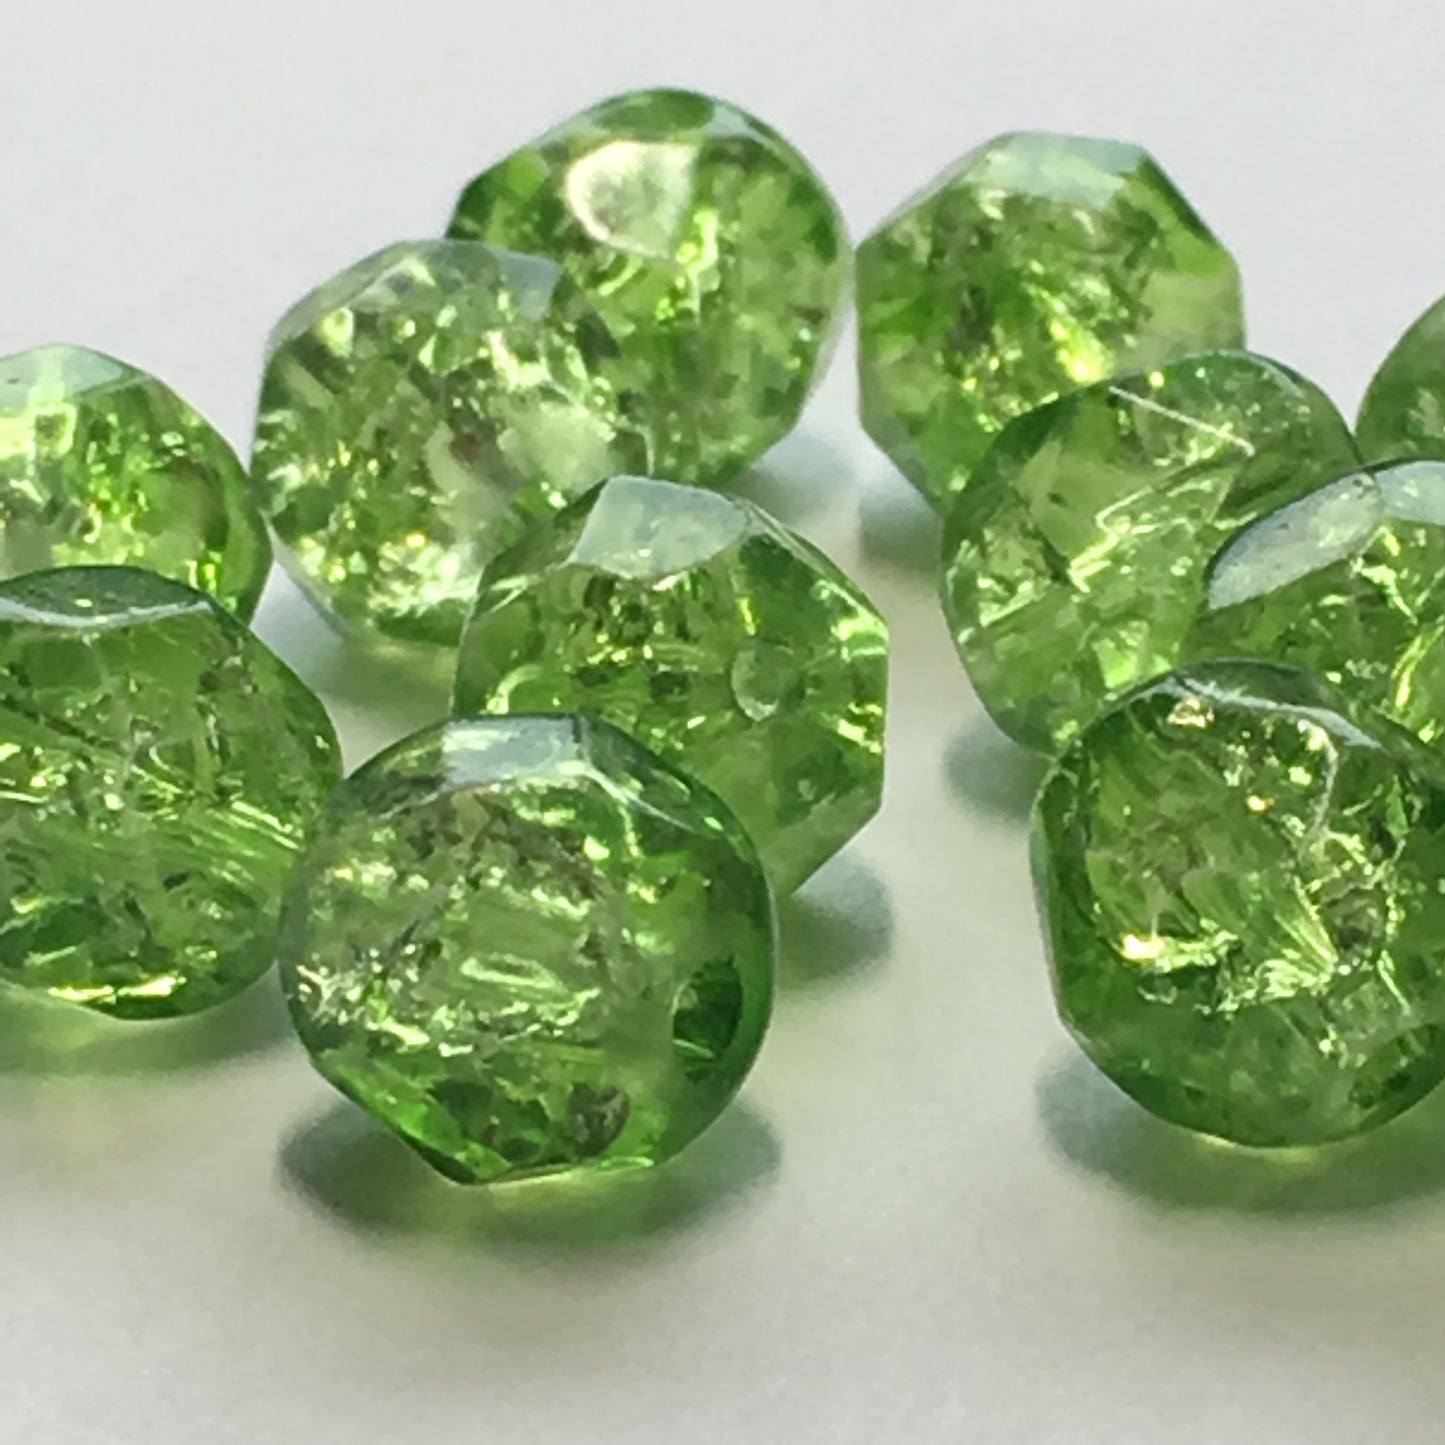 Green Crackle Glass Faceted Beads, 8 mm - 24 Beads